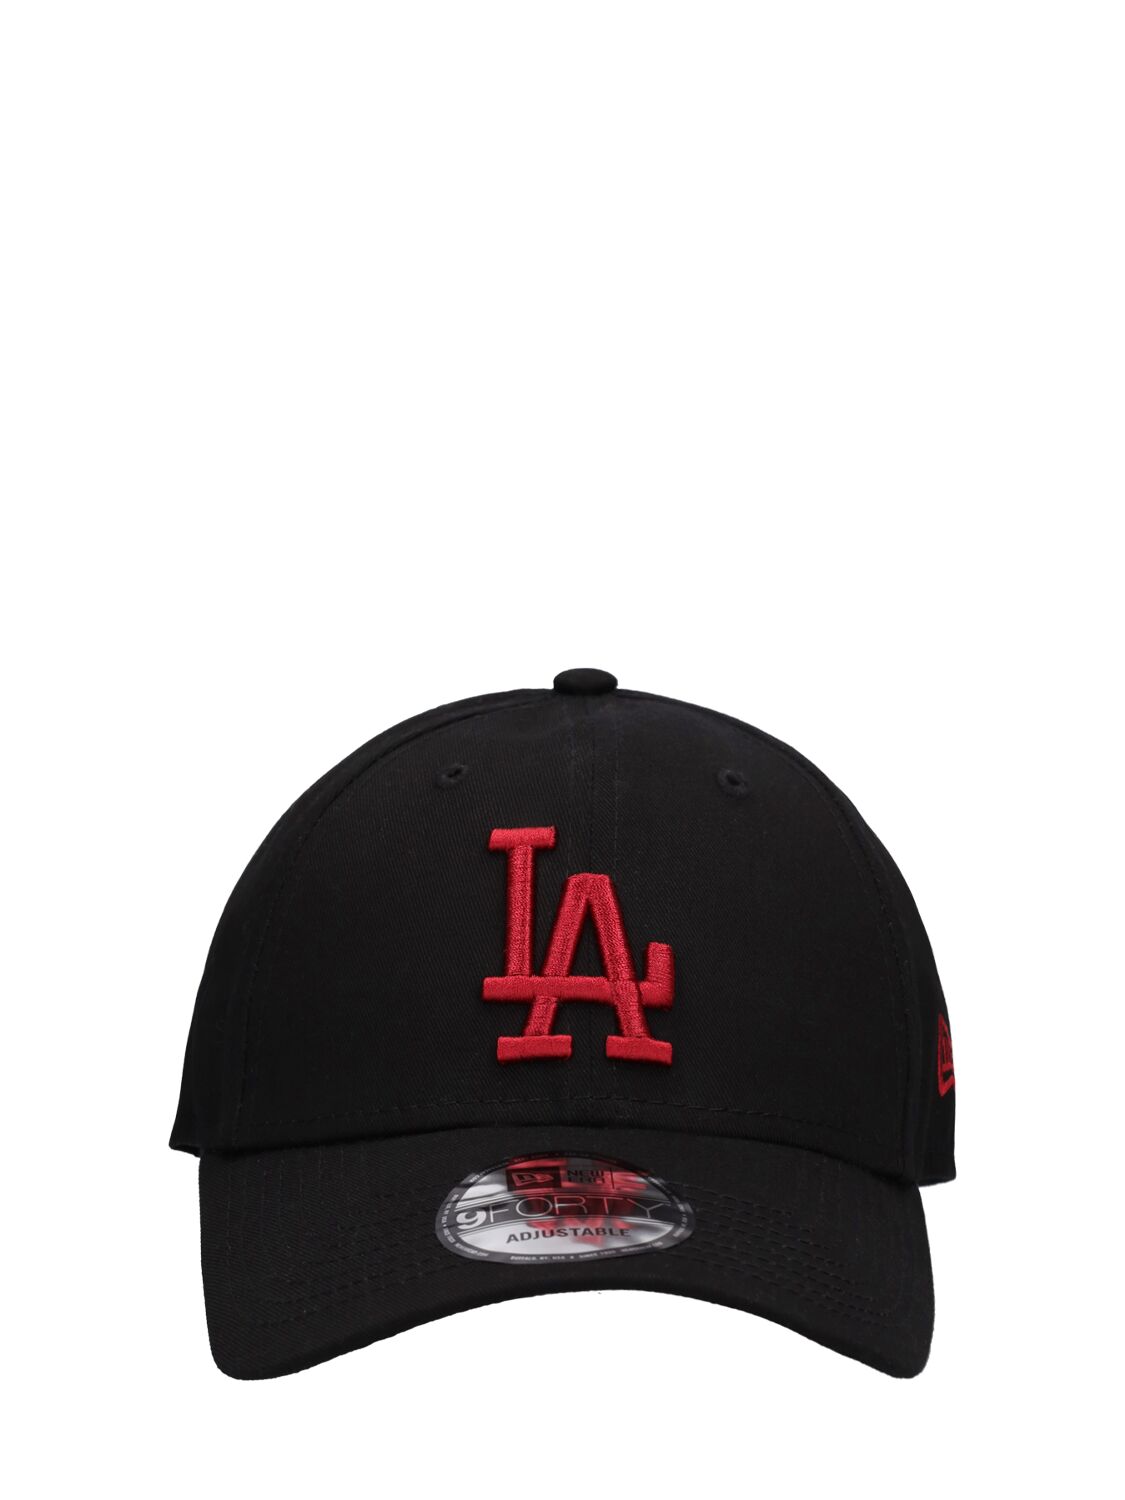 New Era 9forty League Los Angeles Dodgers Hat In Black,red